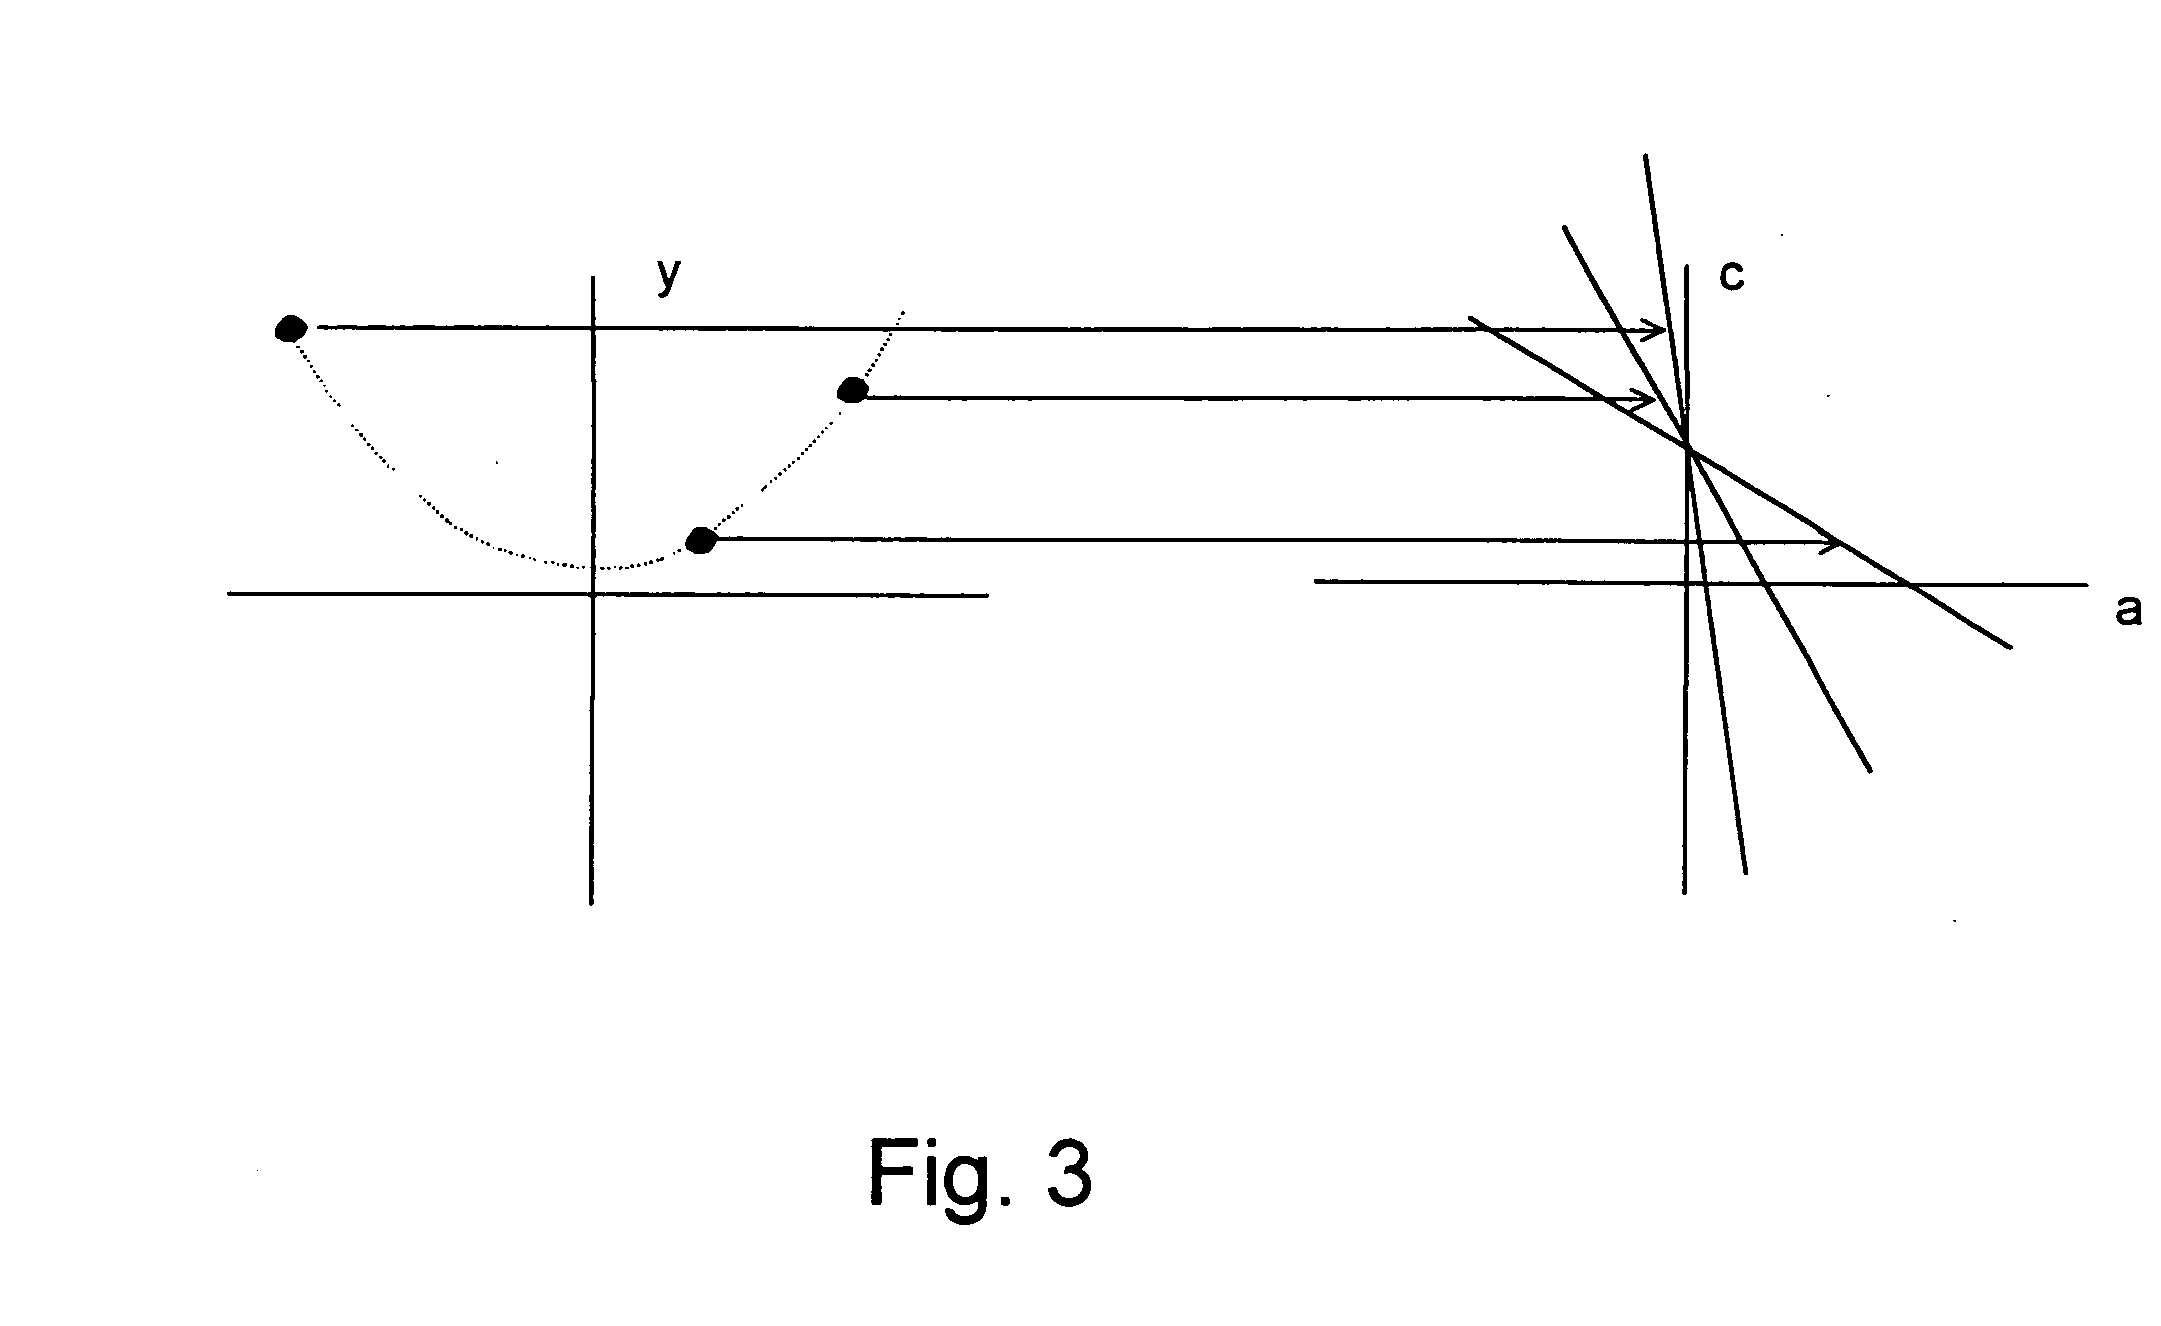 Method for representing the vertical component of road geometry and computing grade or slope